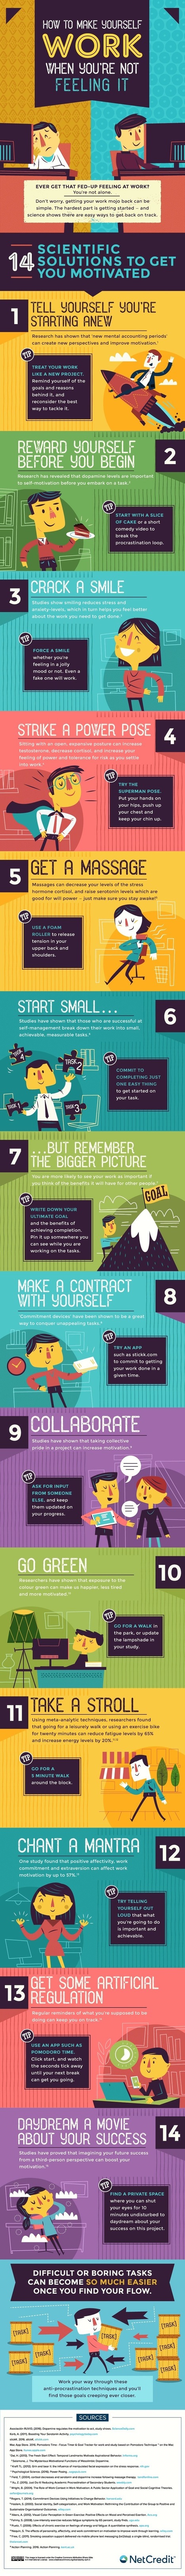 14 Ways To Get Into The Groove At Work  - Infographic | Digital Delights - Digital Tribes | Scoop.it